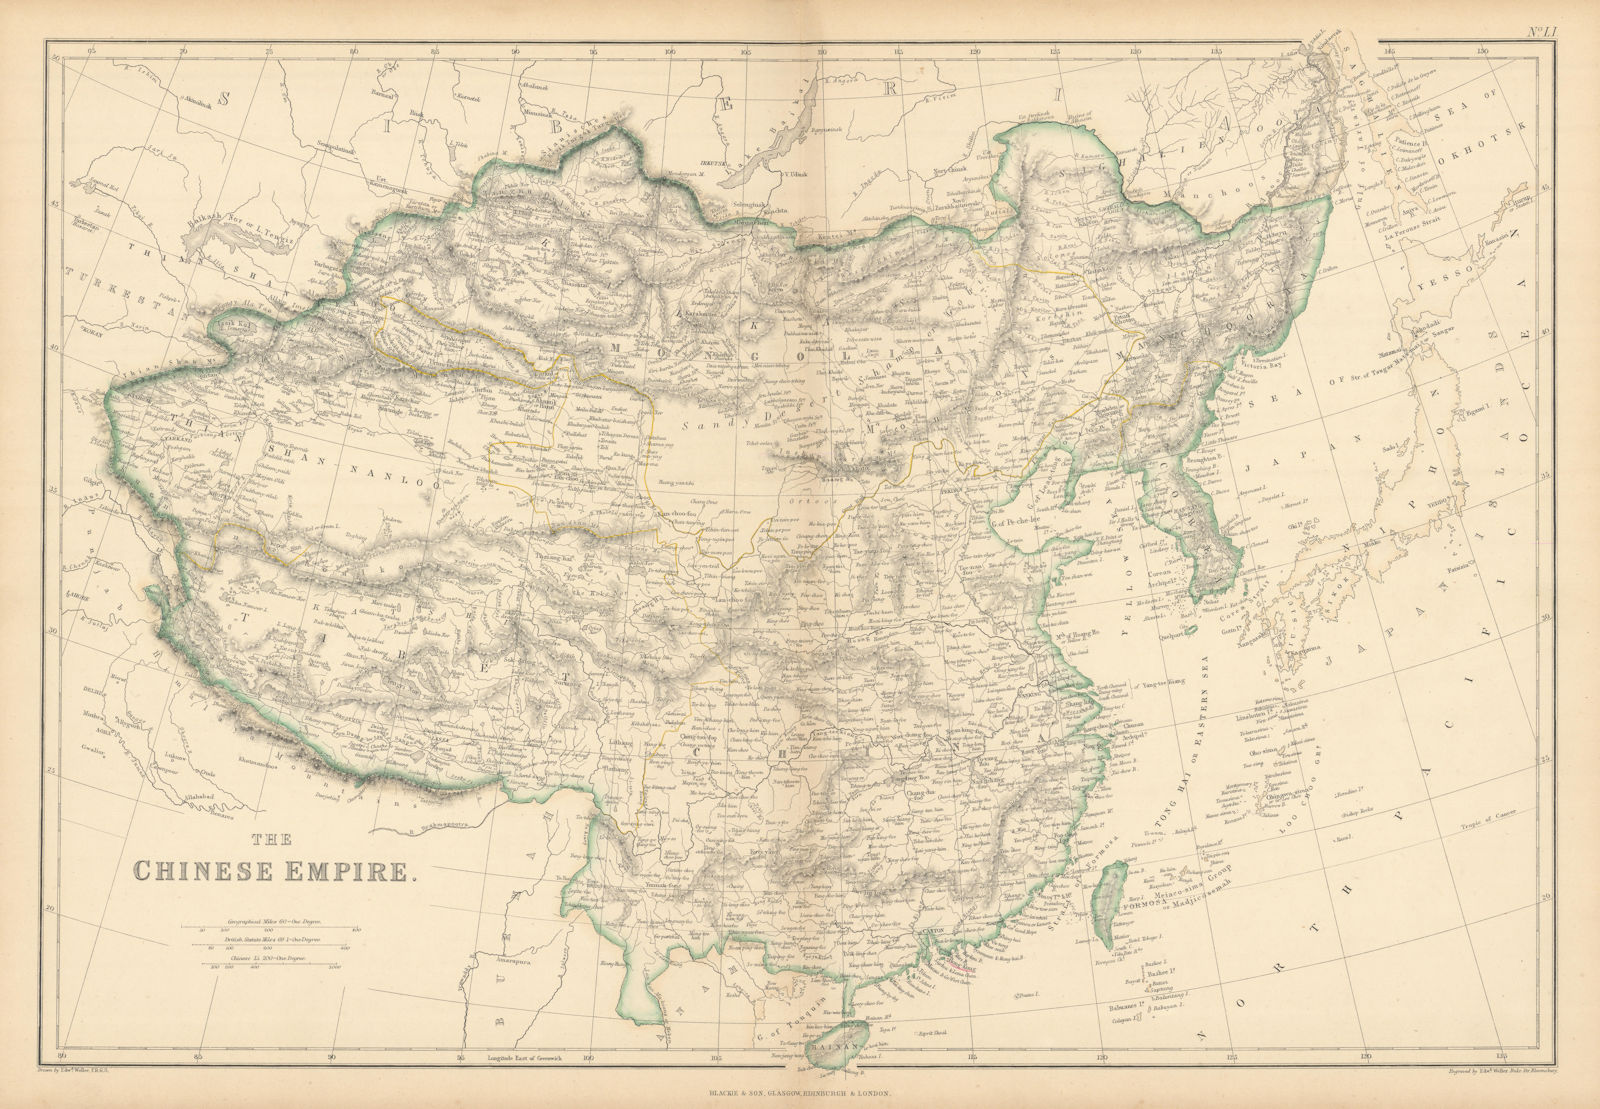 Associate Product The Chinese Empire by Edward Weller. China, Mongolia, Tibet & Korea 1859 map